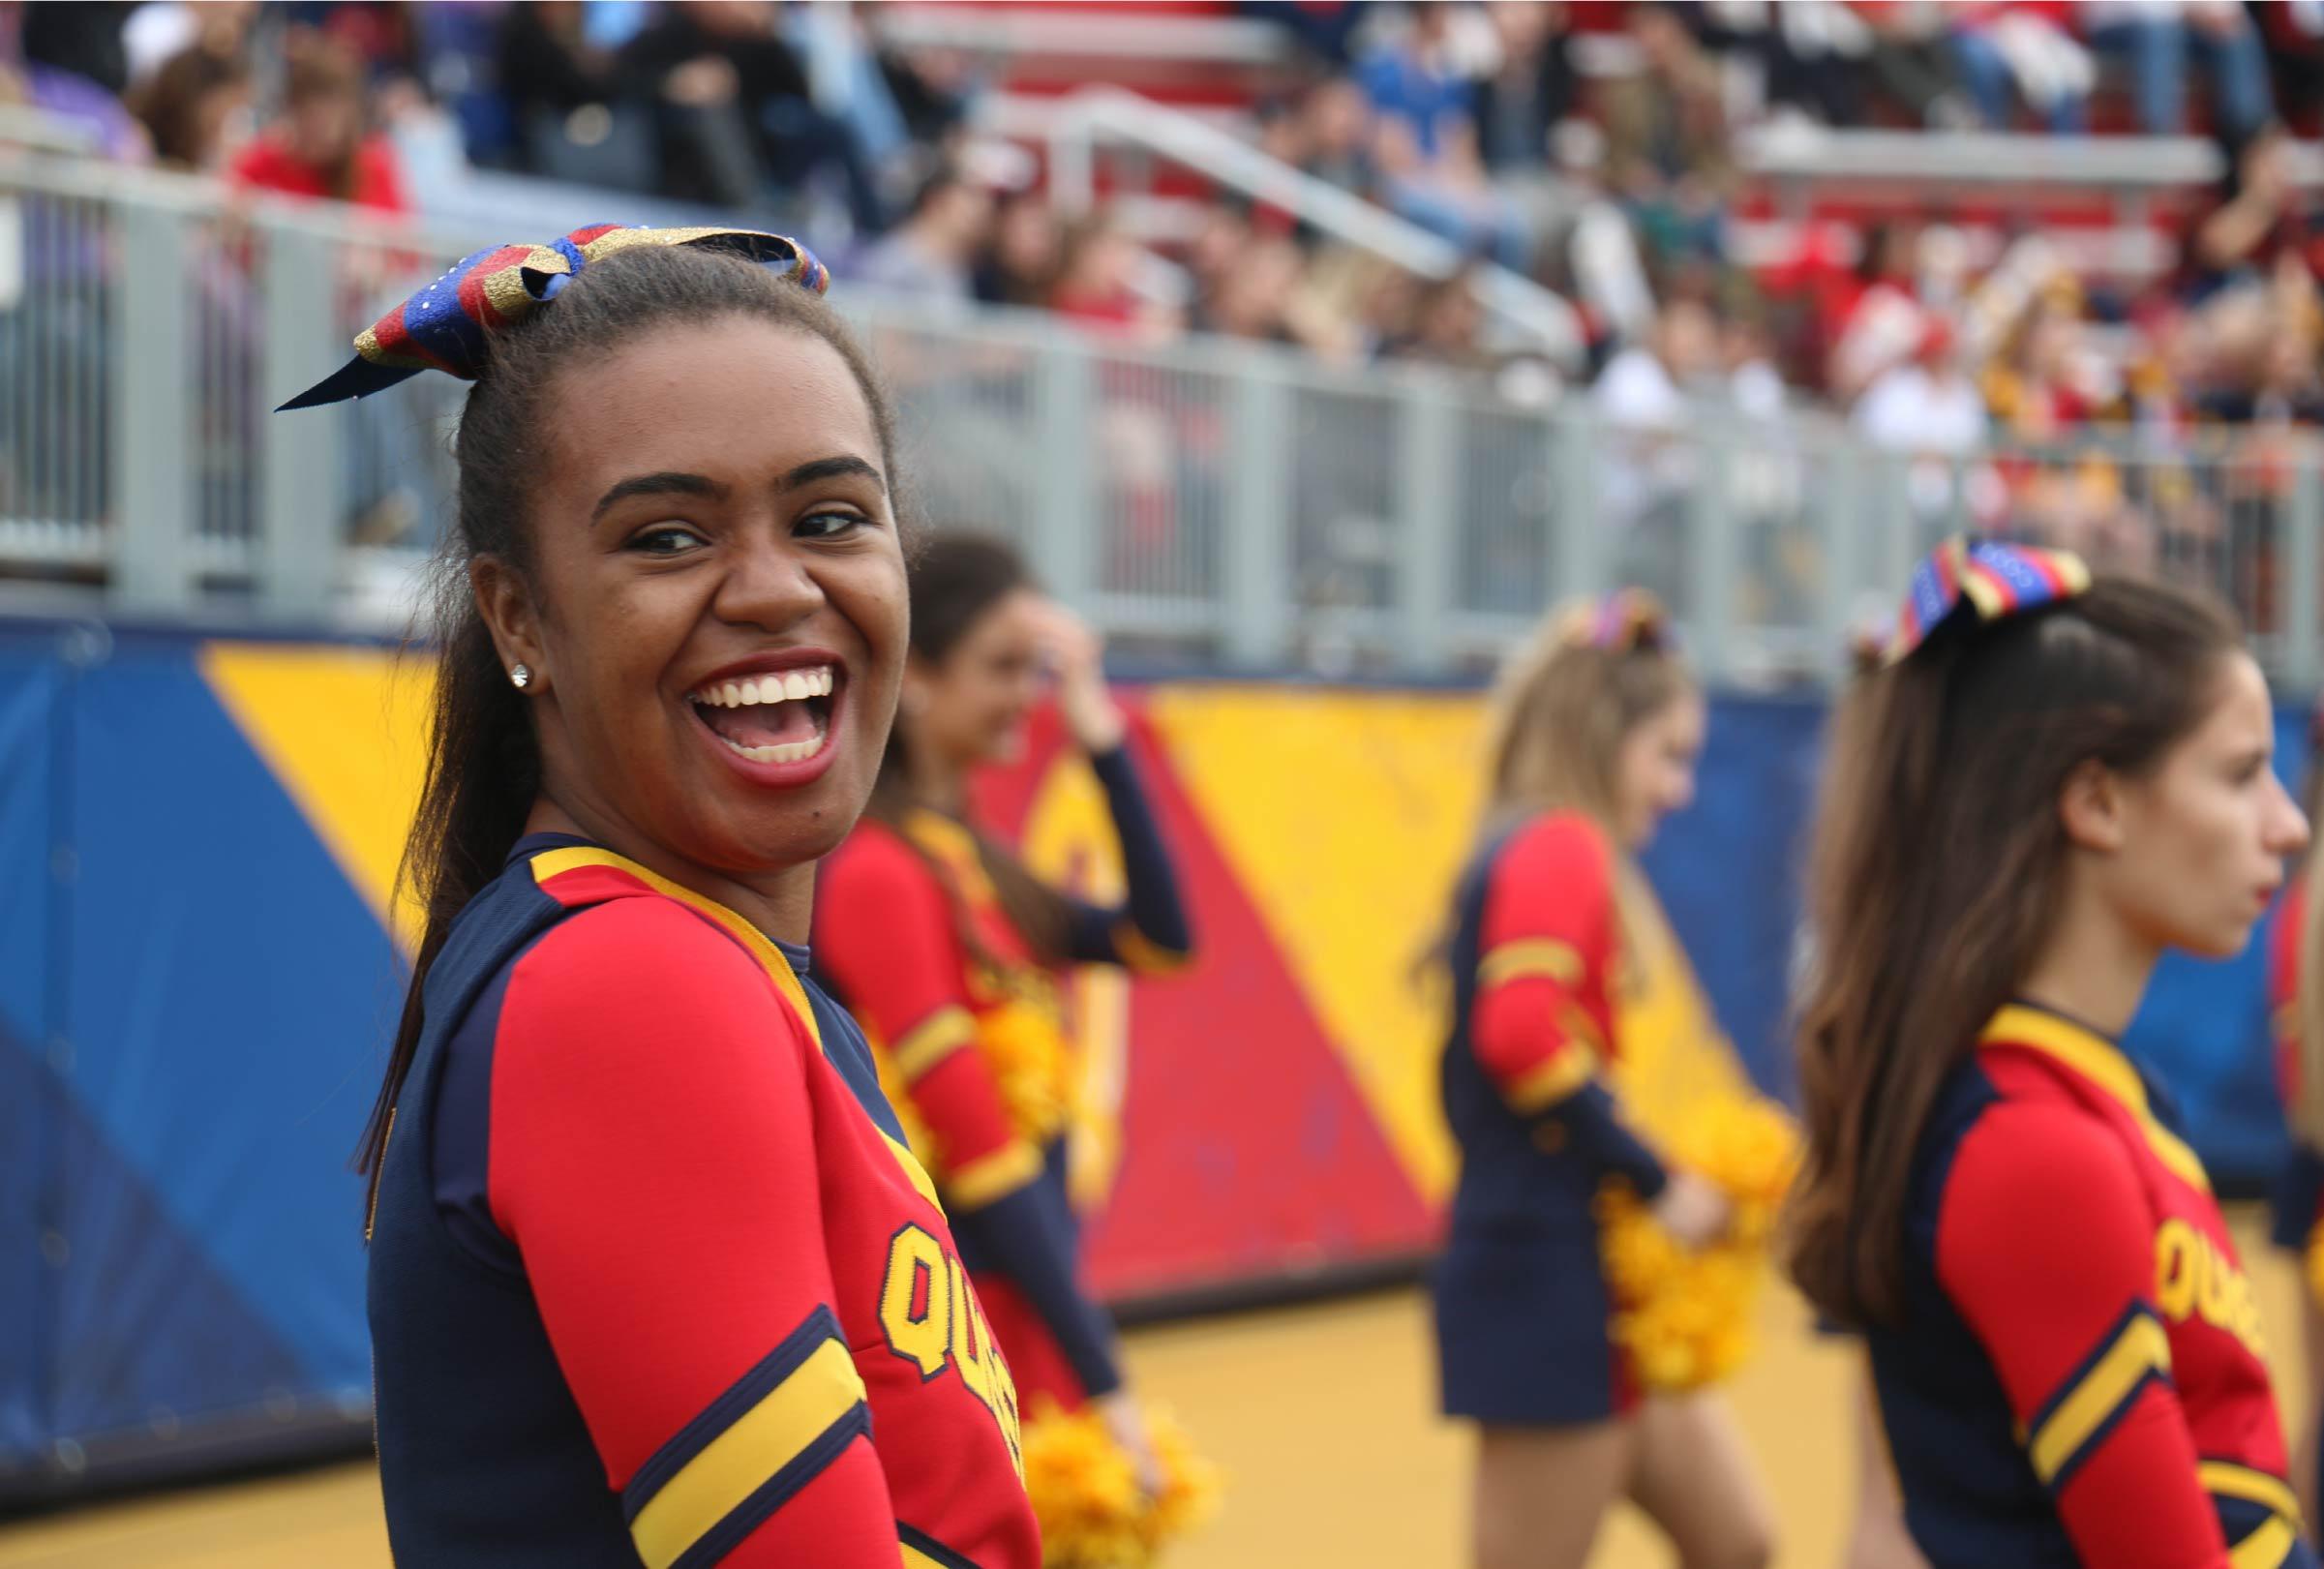 Queen's cheerleader smiling at a football game